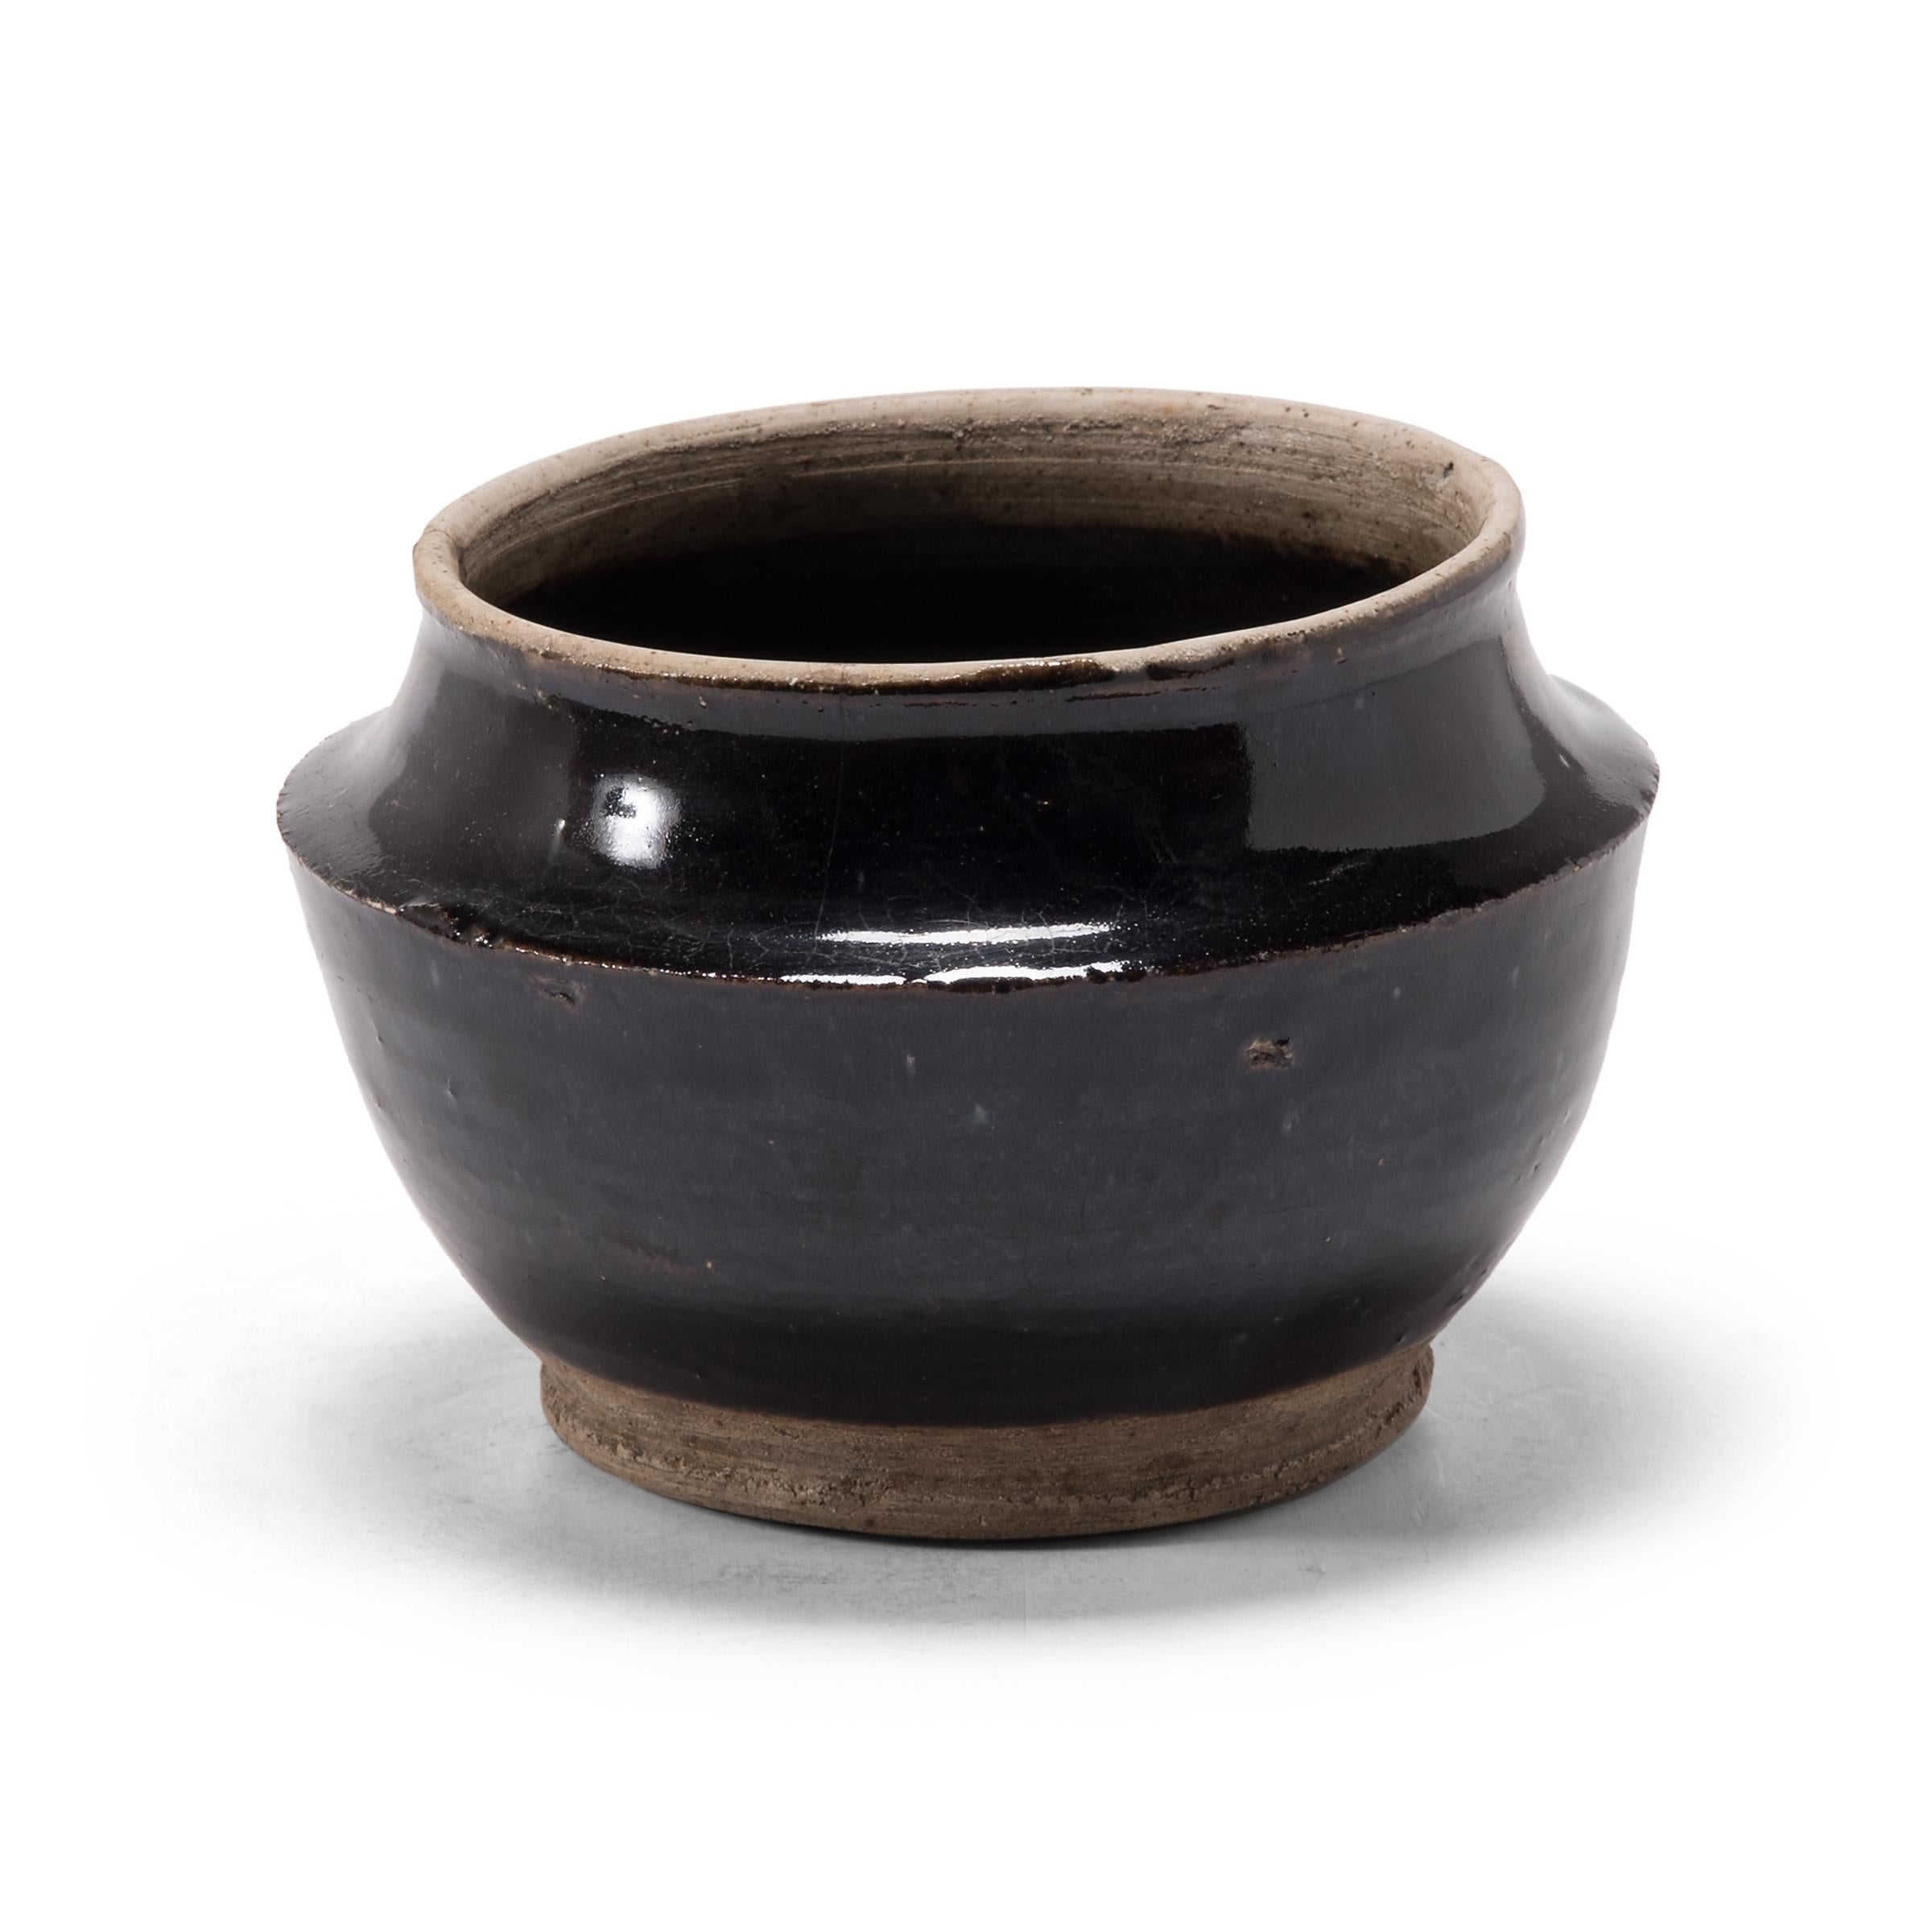 A dark glaze coats the body of this squat kitchen vessel, pooling at the angular shoulders. The petite early 20th century dish was once used for storing food in a Qing-dynasty kitchen, as evidenced by its interior glaze. Dotted with imperfections,